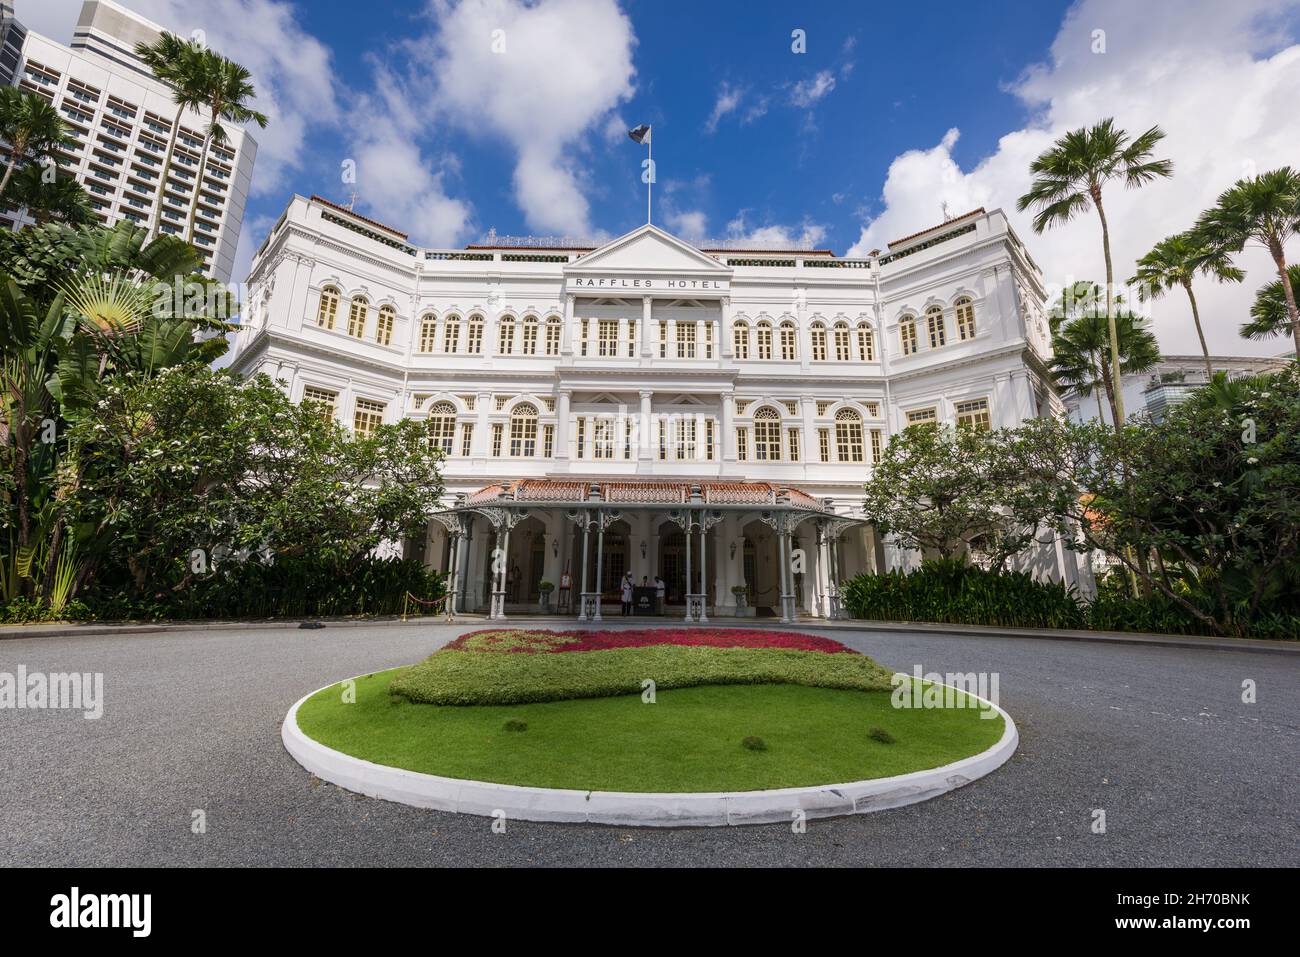 Singapore, 23 Feb 2016: Raffles Hotel is a colonial-style luxury hotel established in 1887. The hotel was named after British statesman Sir Thomas Sta Stock Photo